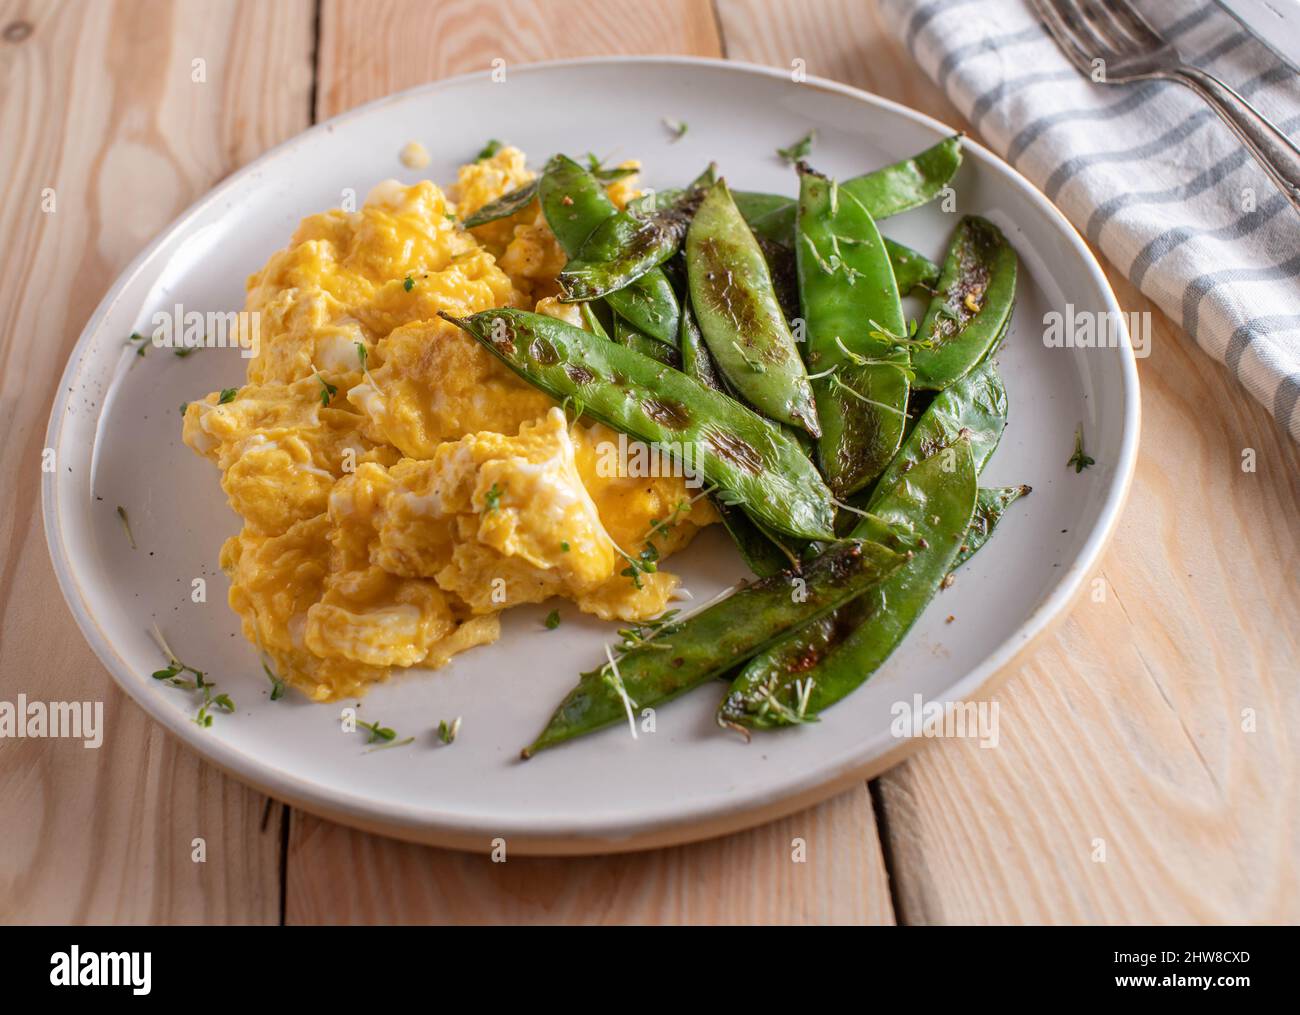 Scrambled eggs with buttered and roasted sugar snap peas. Healthy breakfast for low carb or ketogenic diet Stock Photo